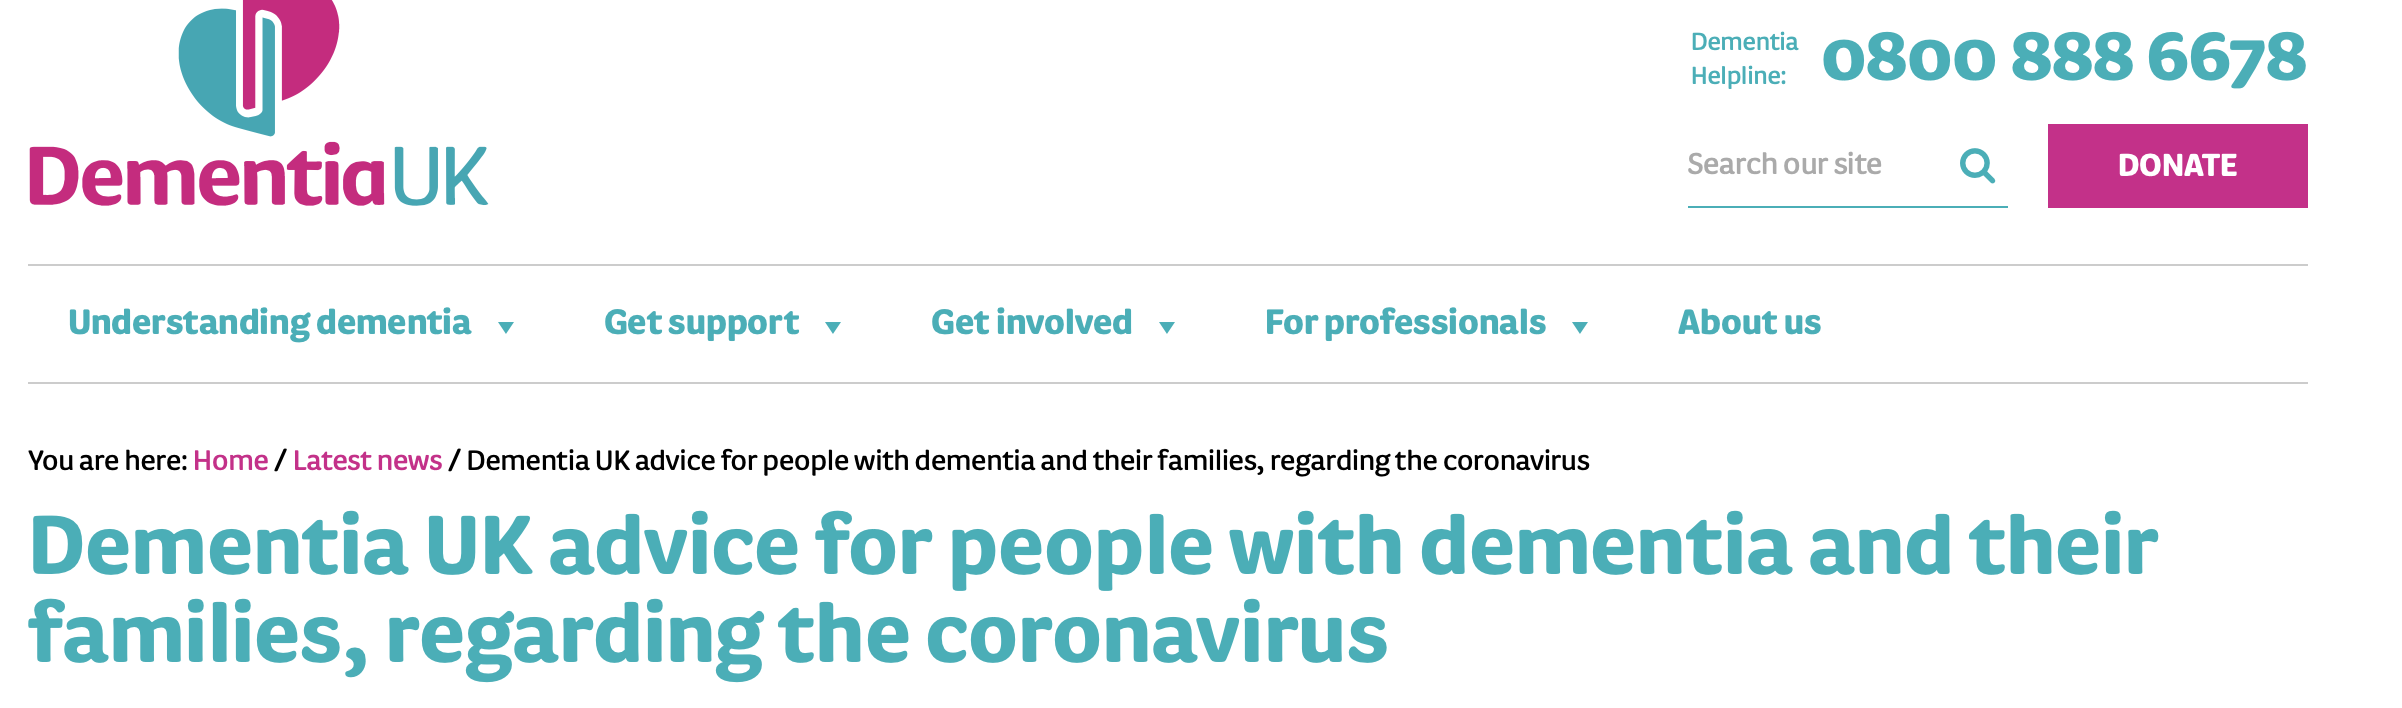 COVID-19: information for families looking after someone with dementia featured image